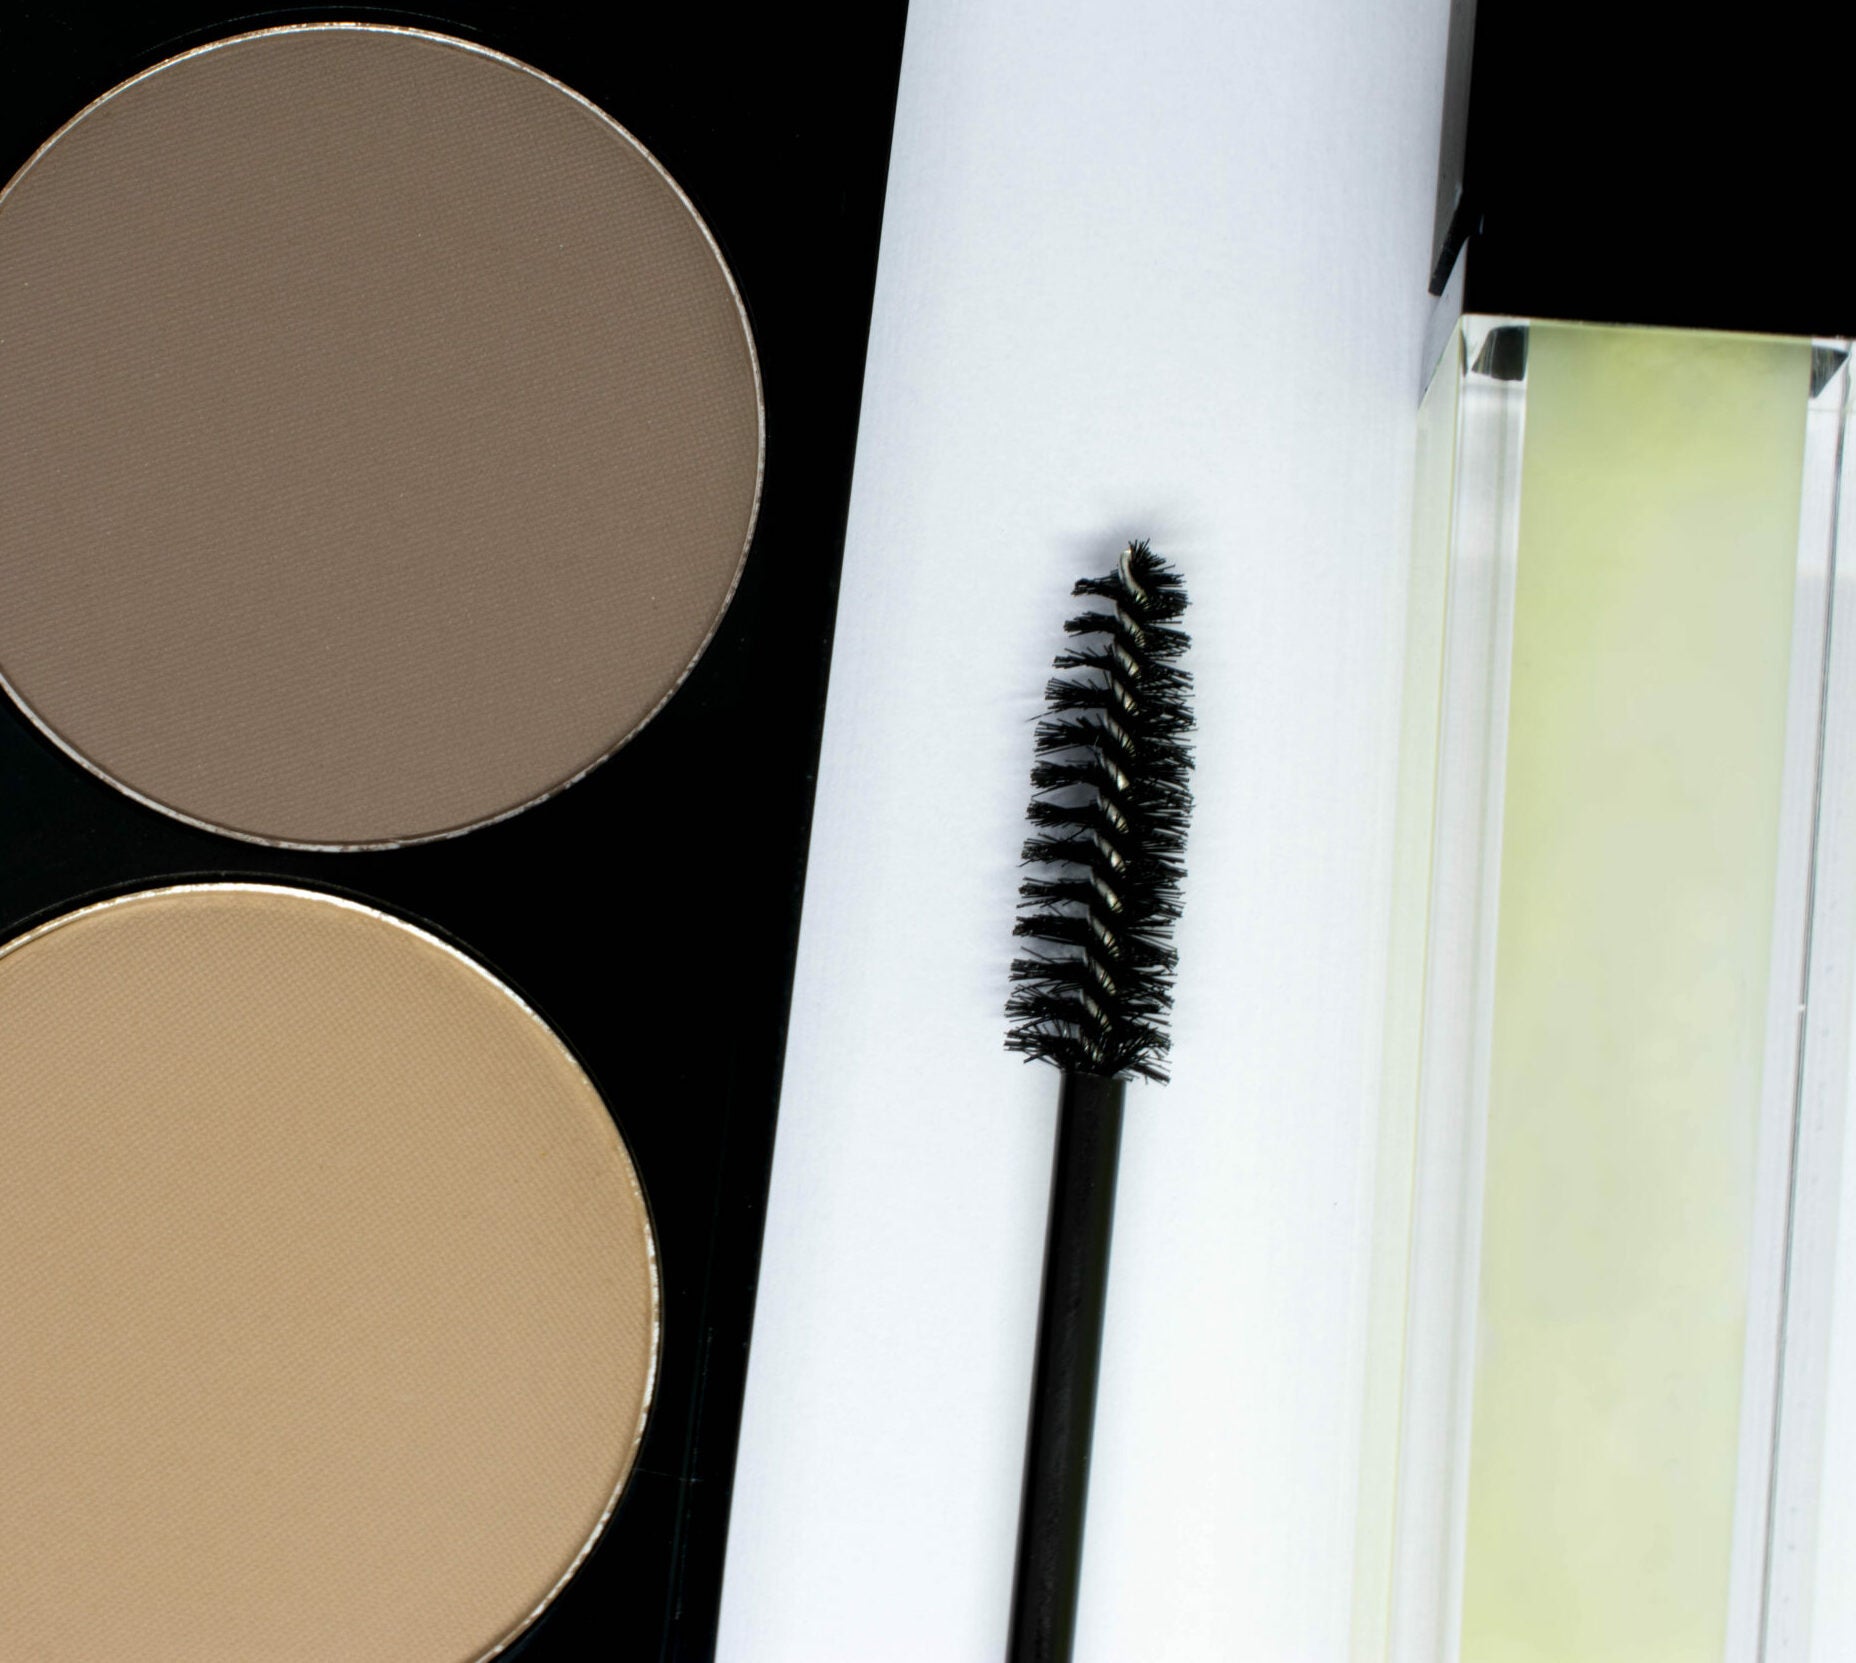 array of cosmetics for brows including brow powder, gel and comb